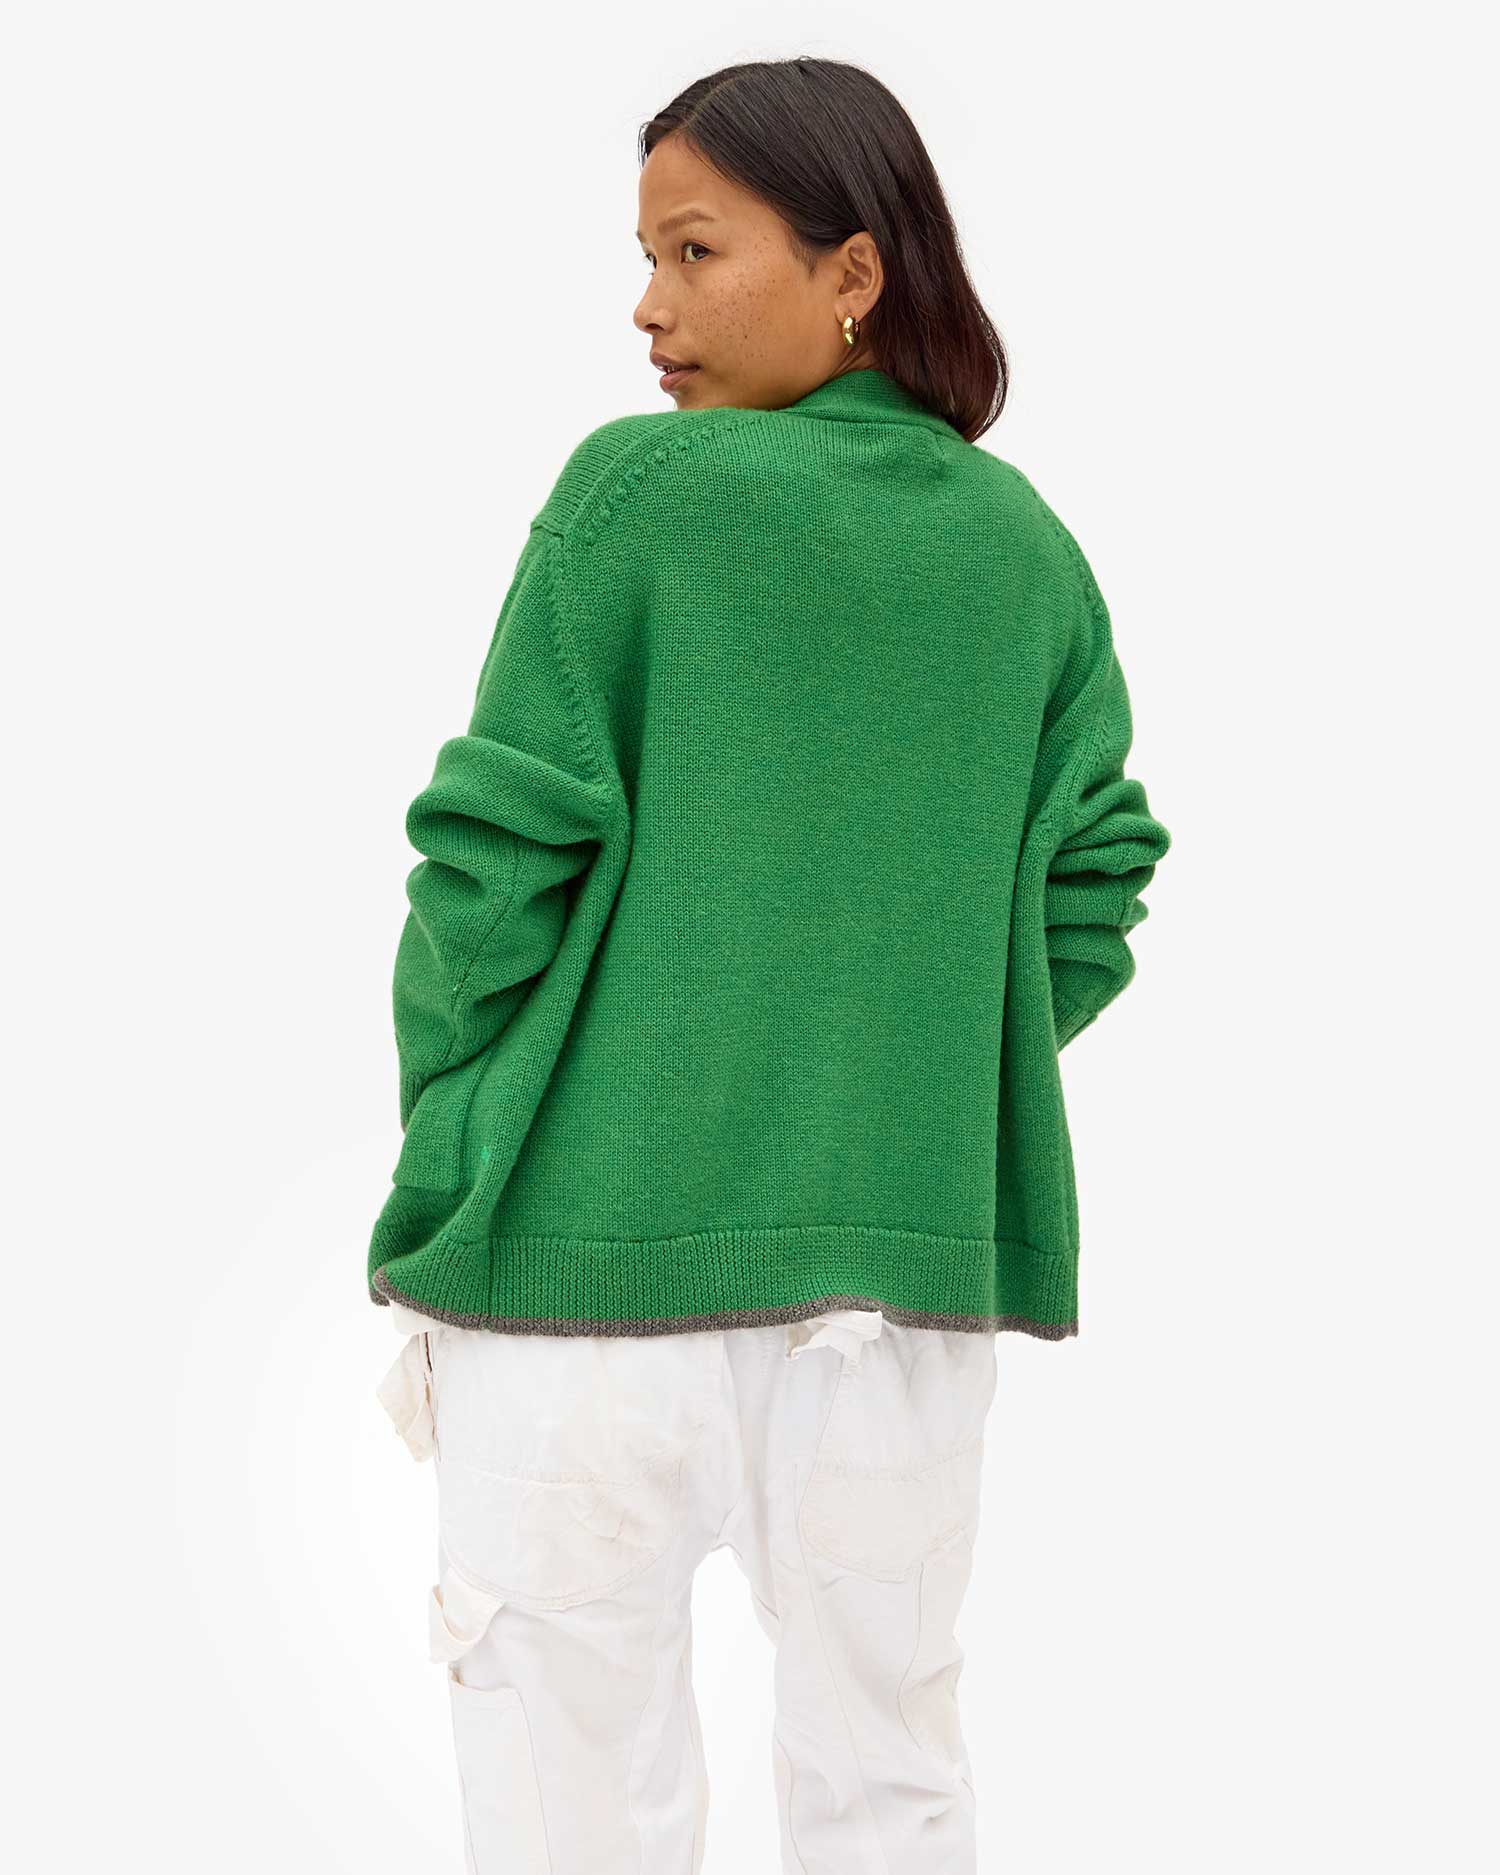 back view of Maly in the Oscar Sweater in Granny Smith